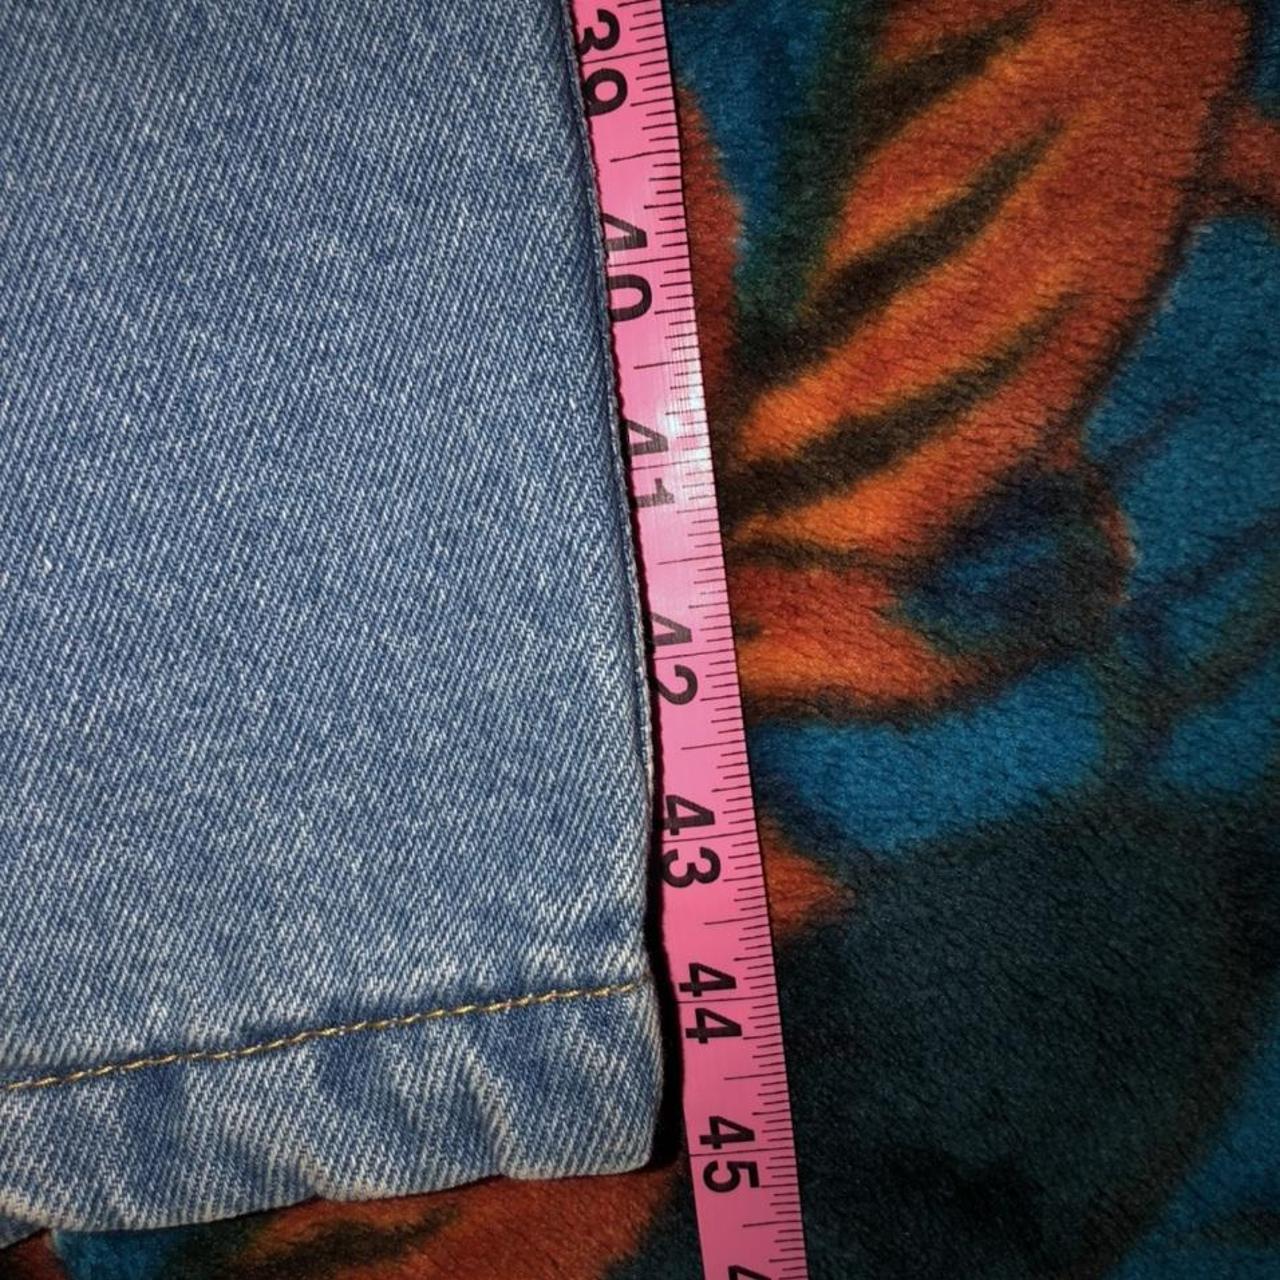 Product Image 3 - Icon jeans waist size 34.Outseam